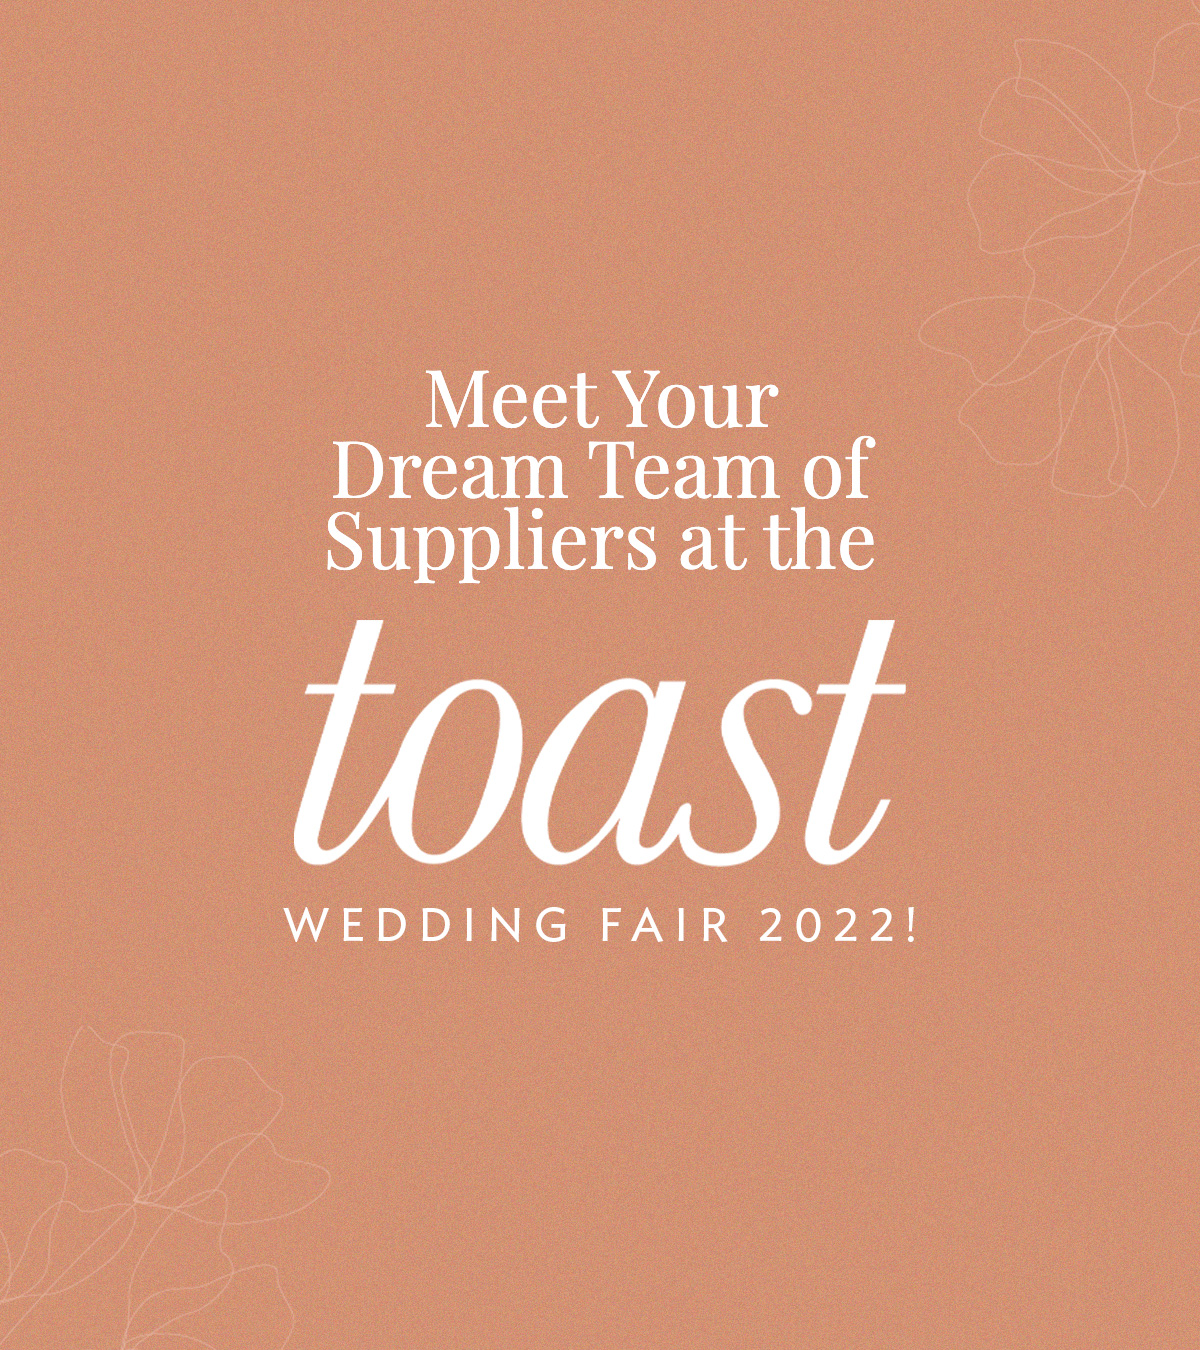 Meet Your Dream Team of Suppliers at the Toast Wedding Fair 2022!